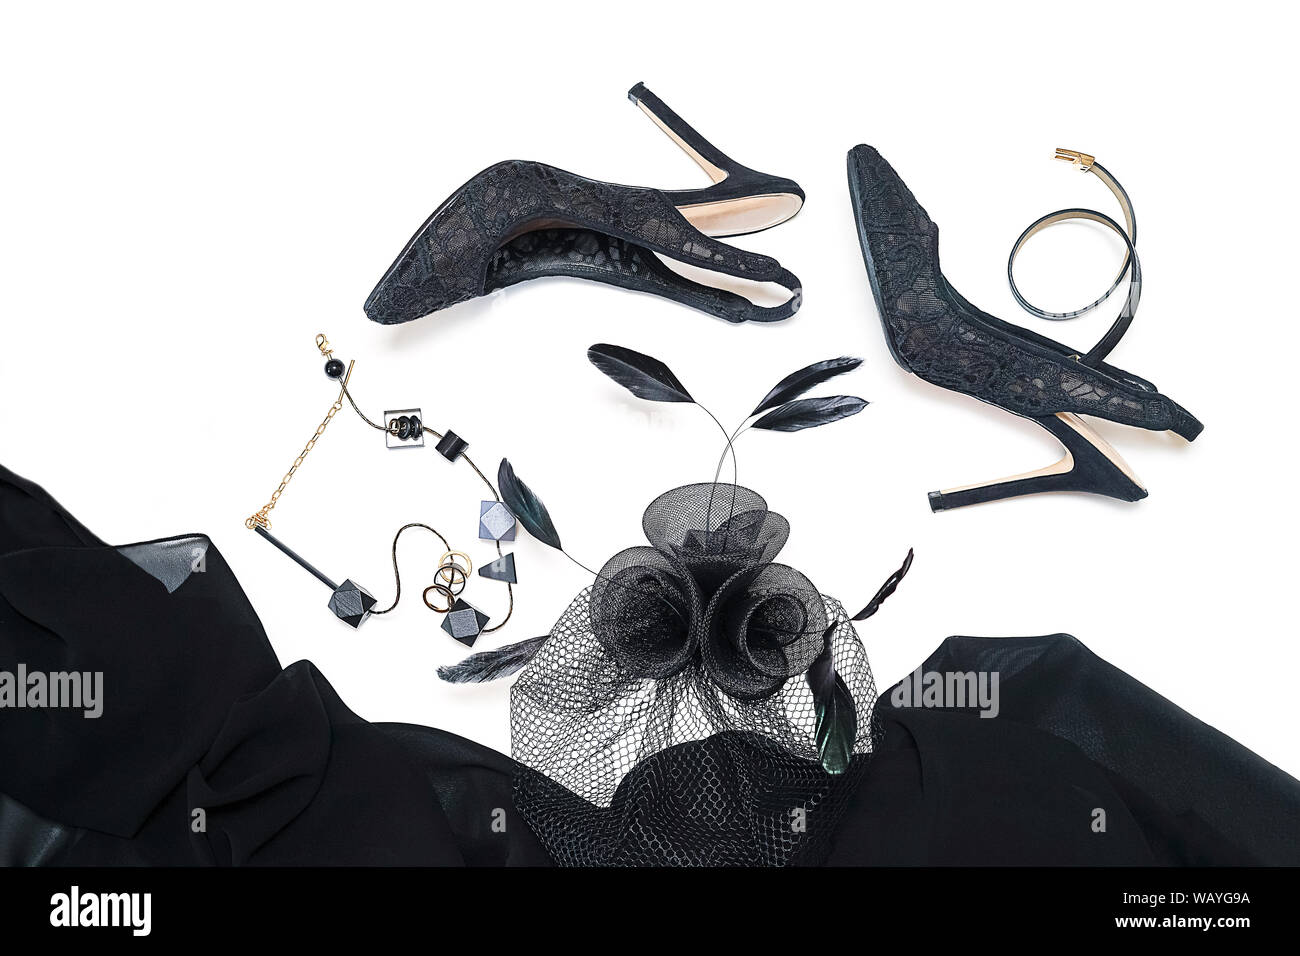 Halloween party female outfit collection accessories black on white background, shoes, cloth with skulls, jewelry, bag. Stock Photo